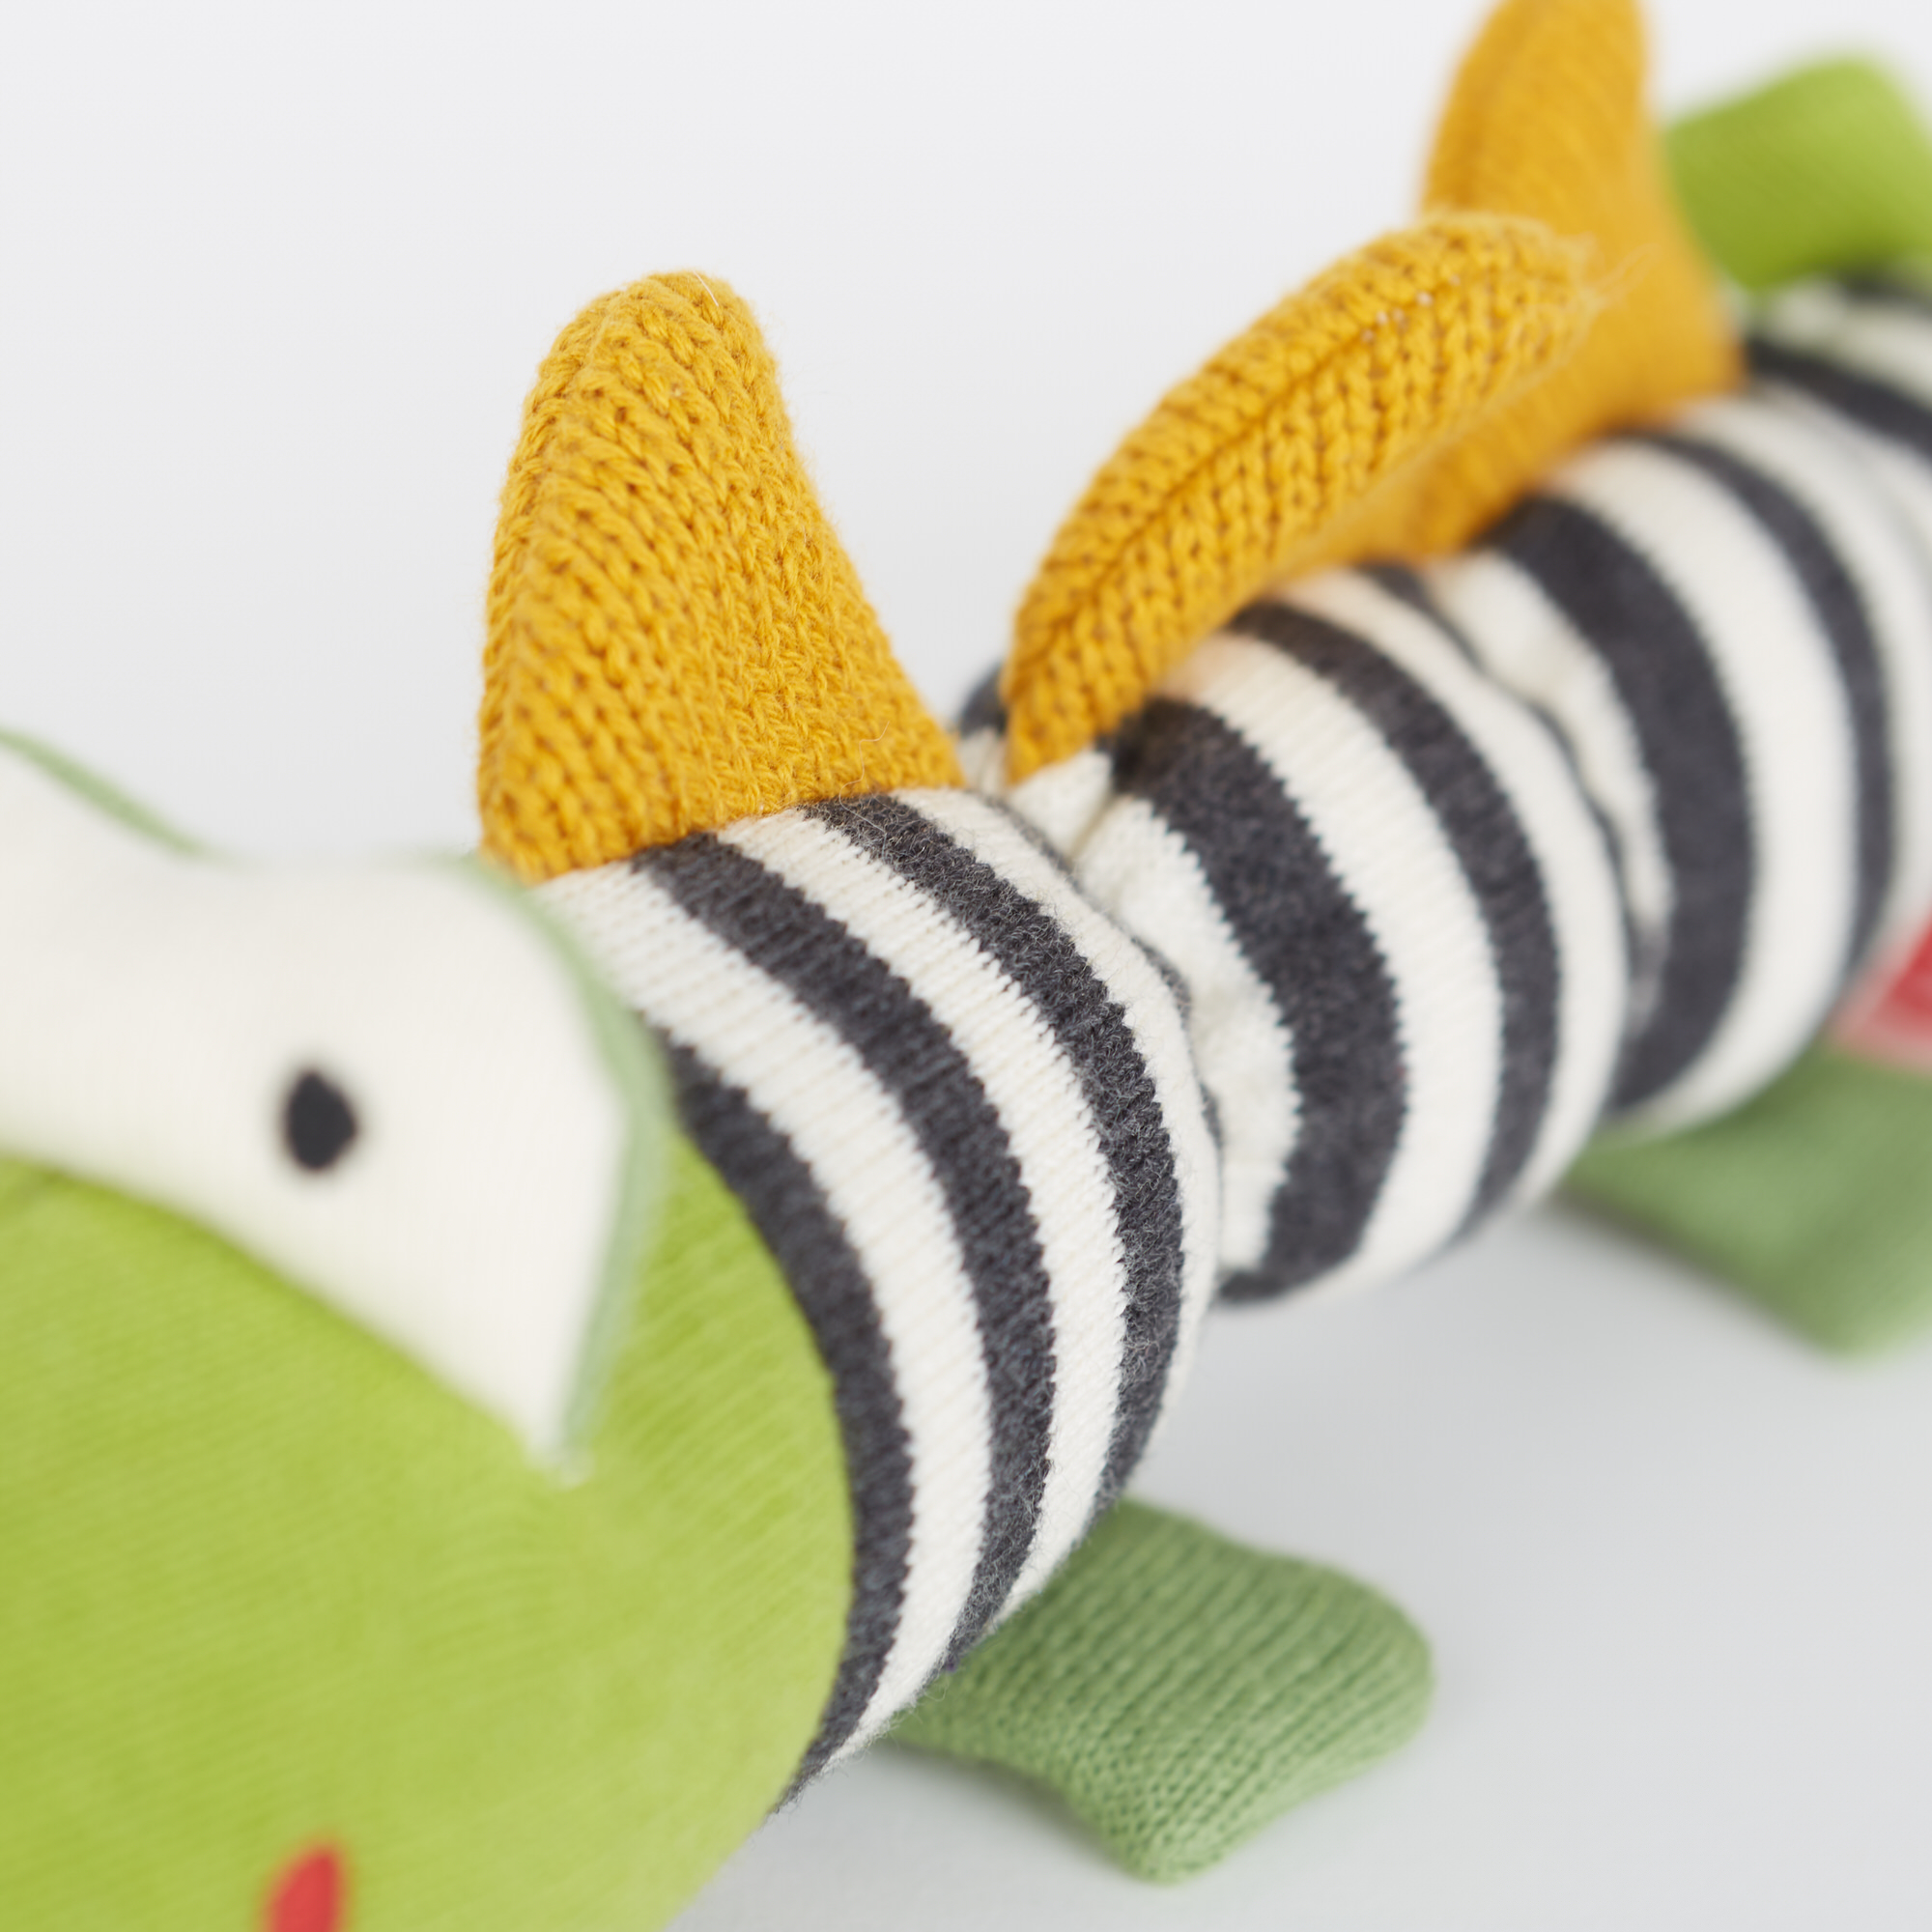 Knitted grasp toy crocodile, with rattle and wooden teether